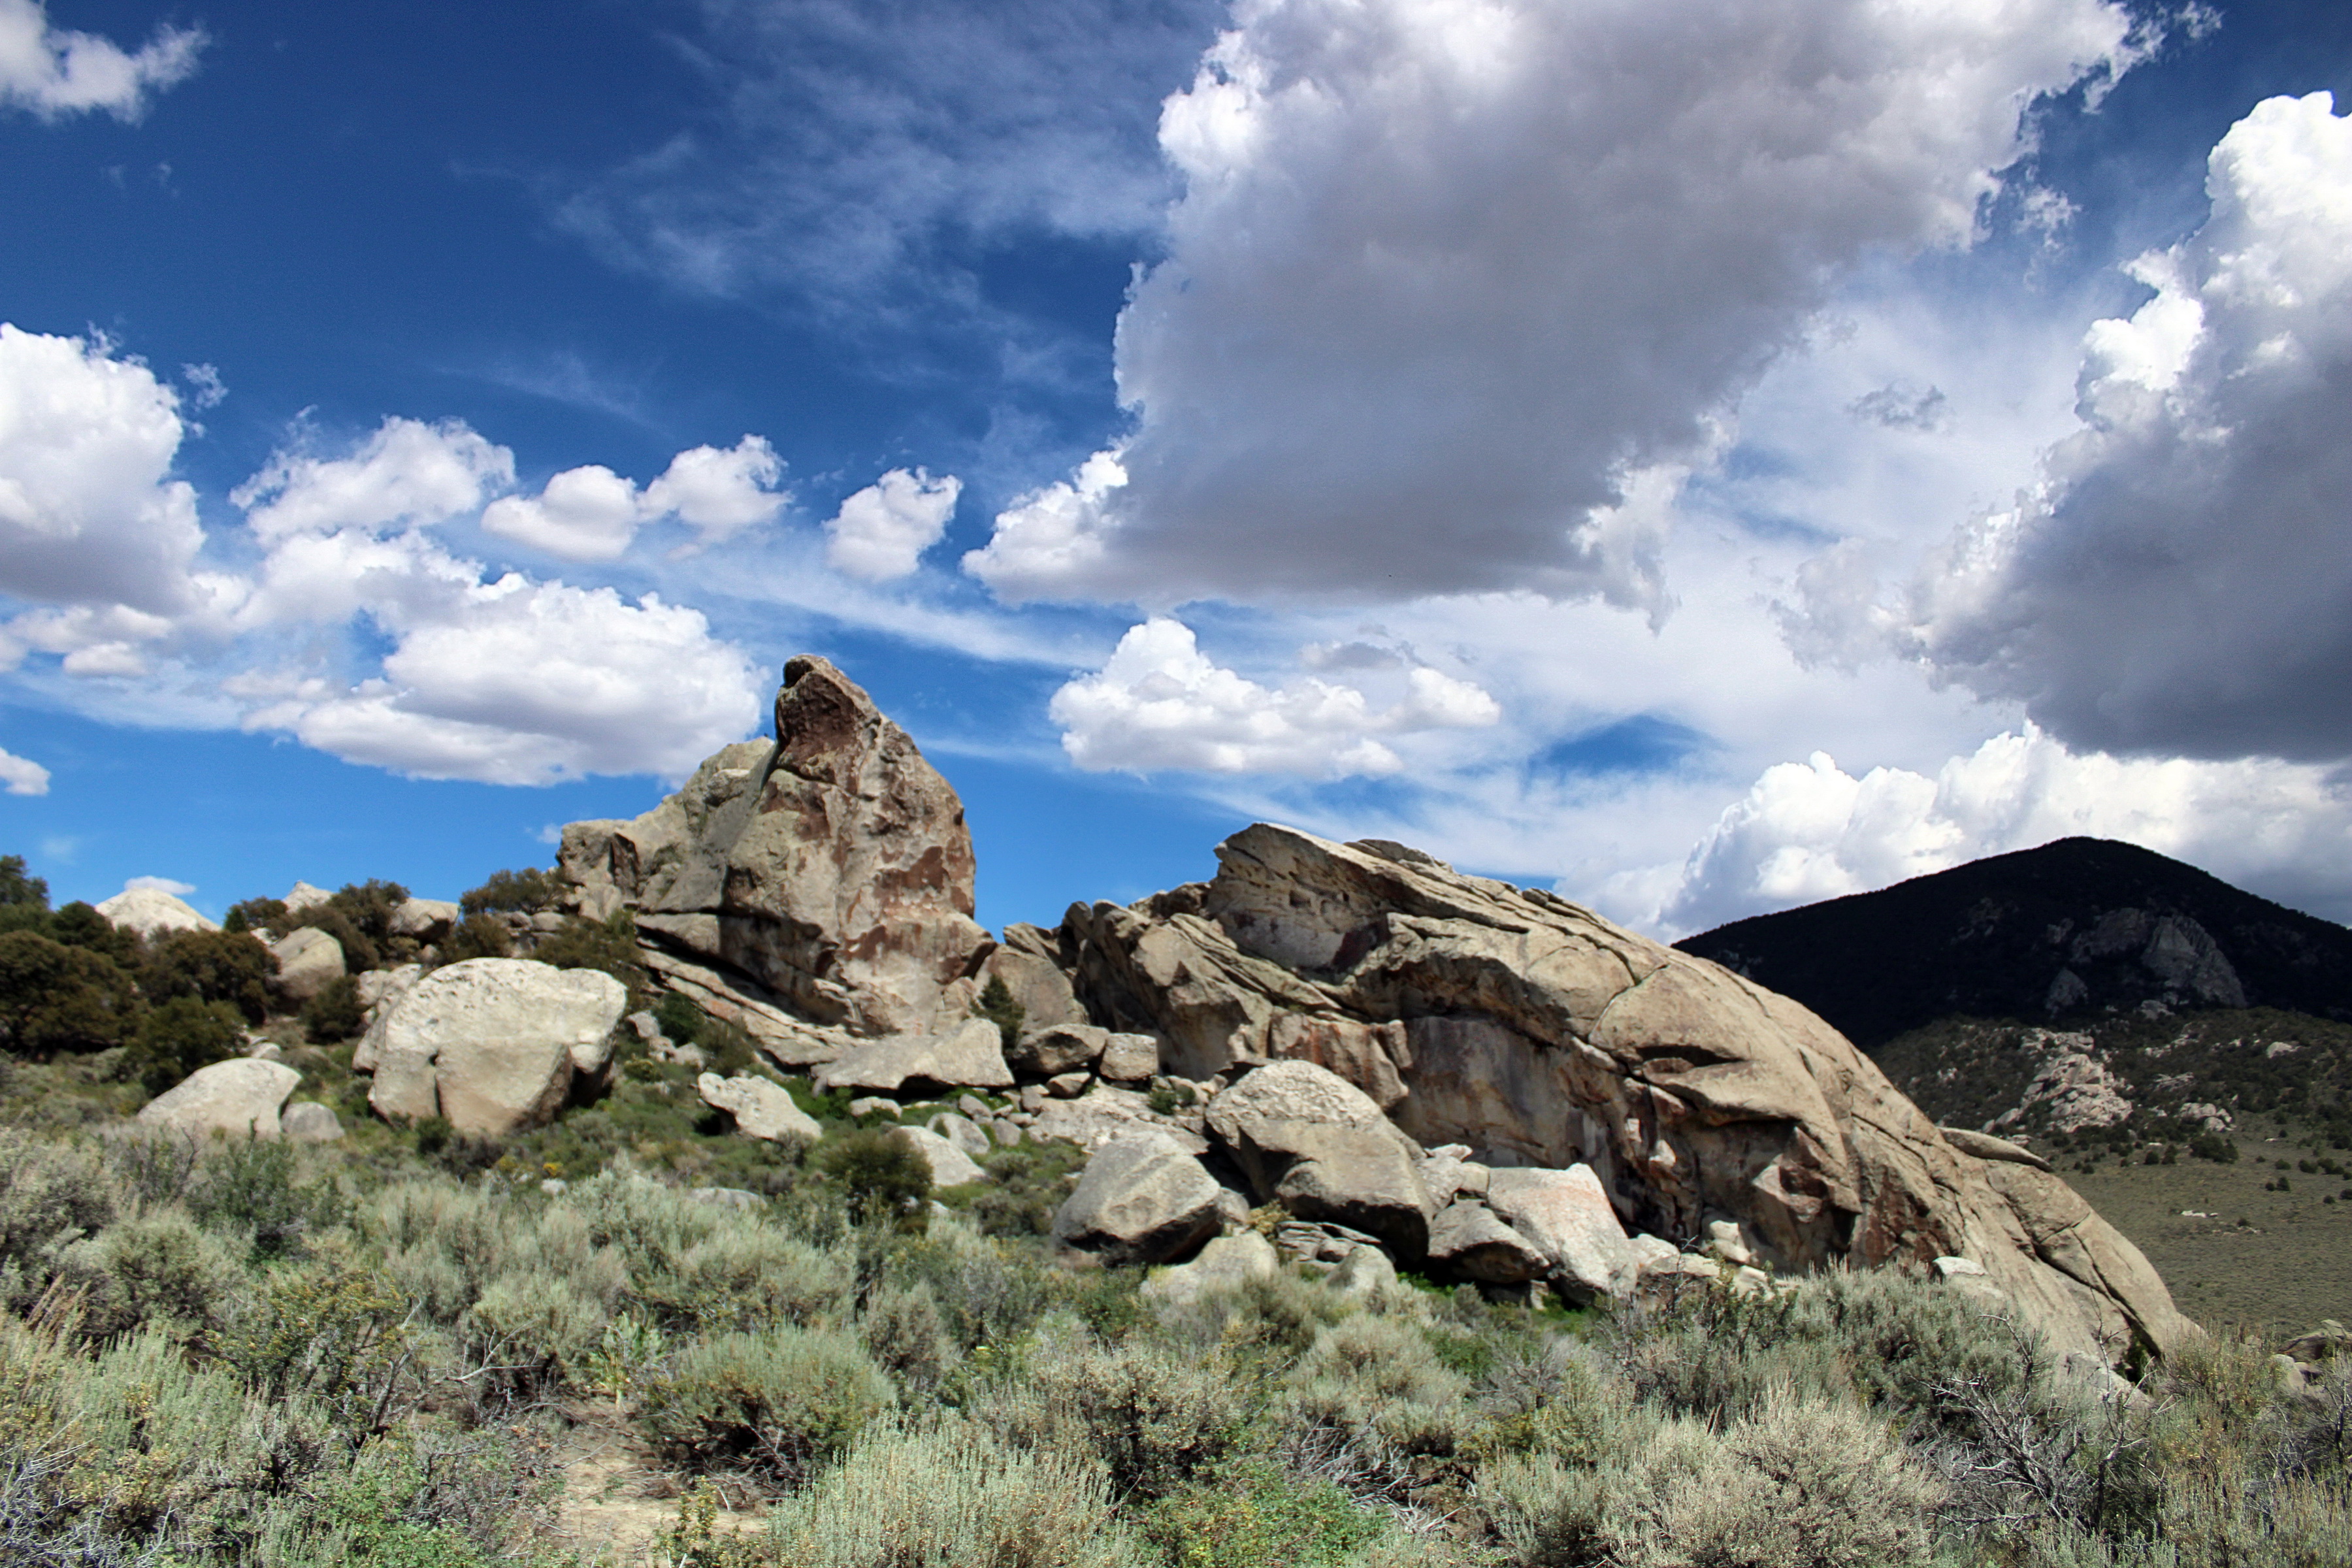 Granite rock formations under a blue sky with fluffy clouds.